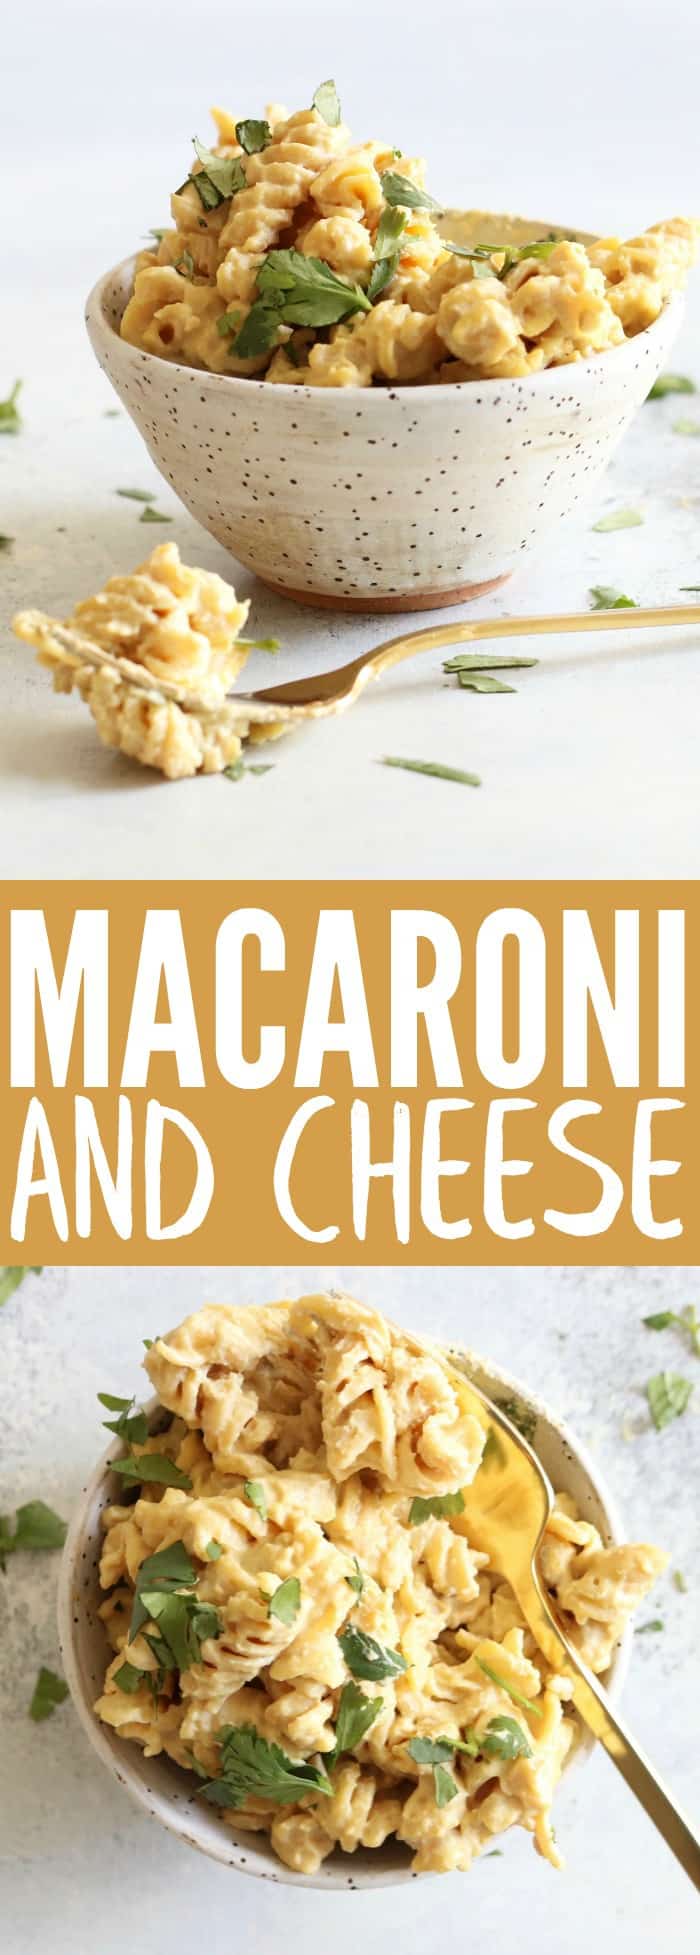 Macaroni + Cheese is an easy meal guaranteed to be a family favorite. It's made with chickpea pasta so it's lower carb compared to traditional pasta, gluten free, and vegan! thetoastedpinenut.com #glutenfree #dairyfree #macaroniandcheese #vegan